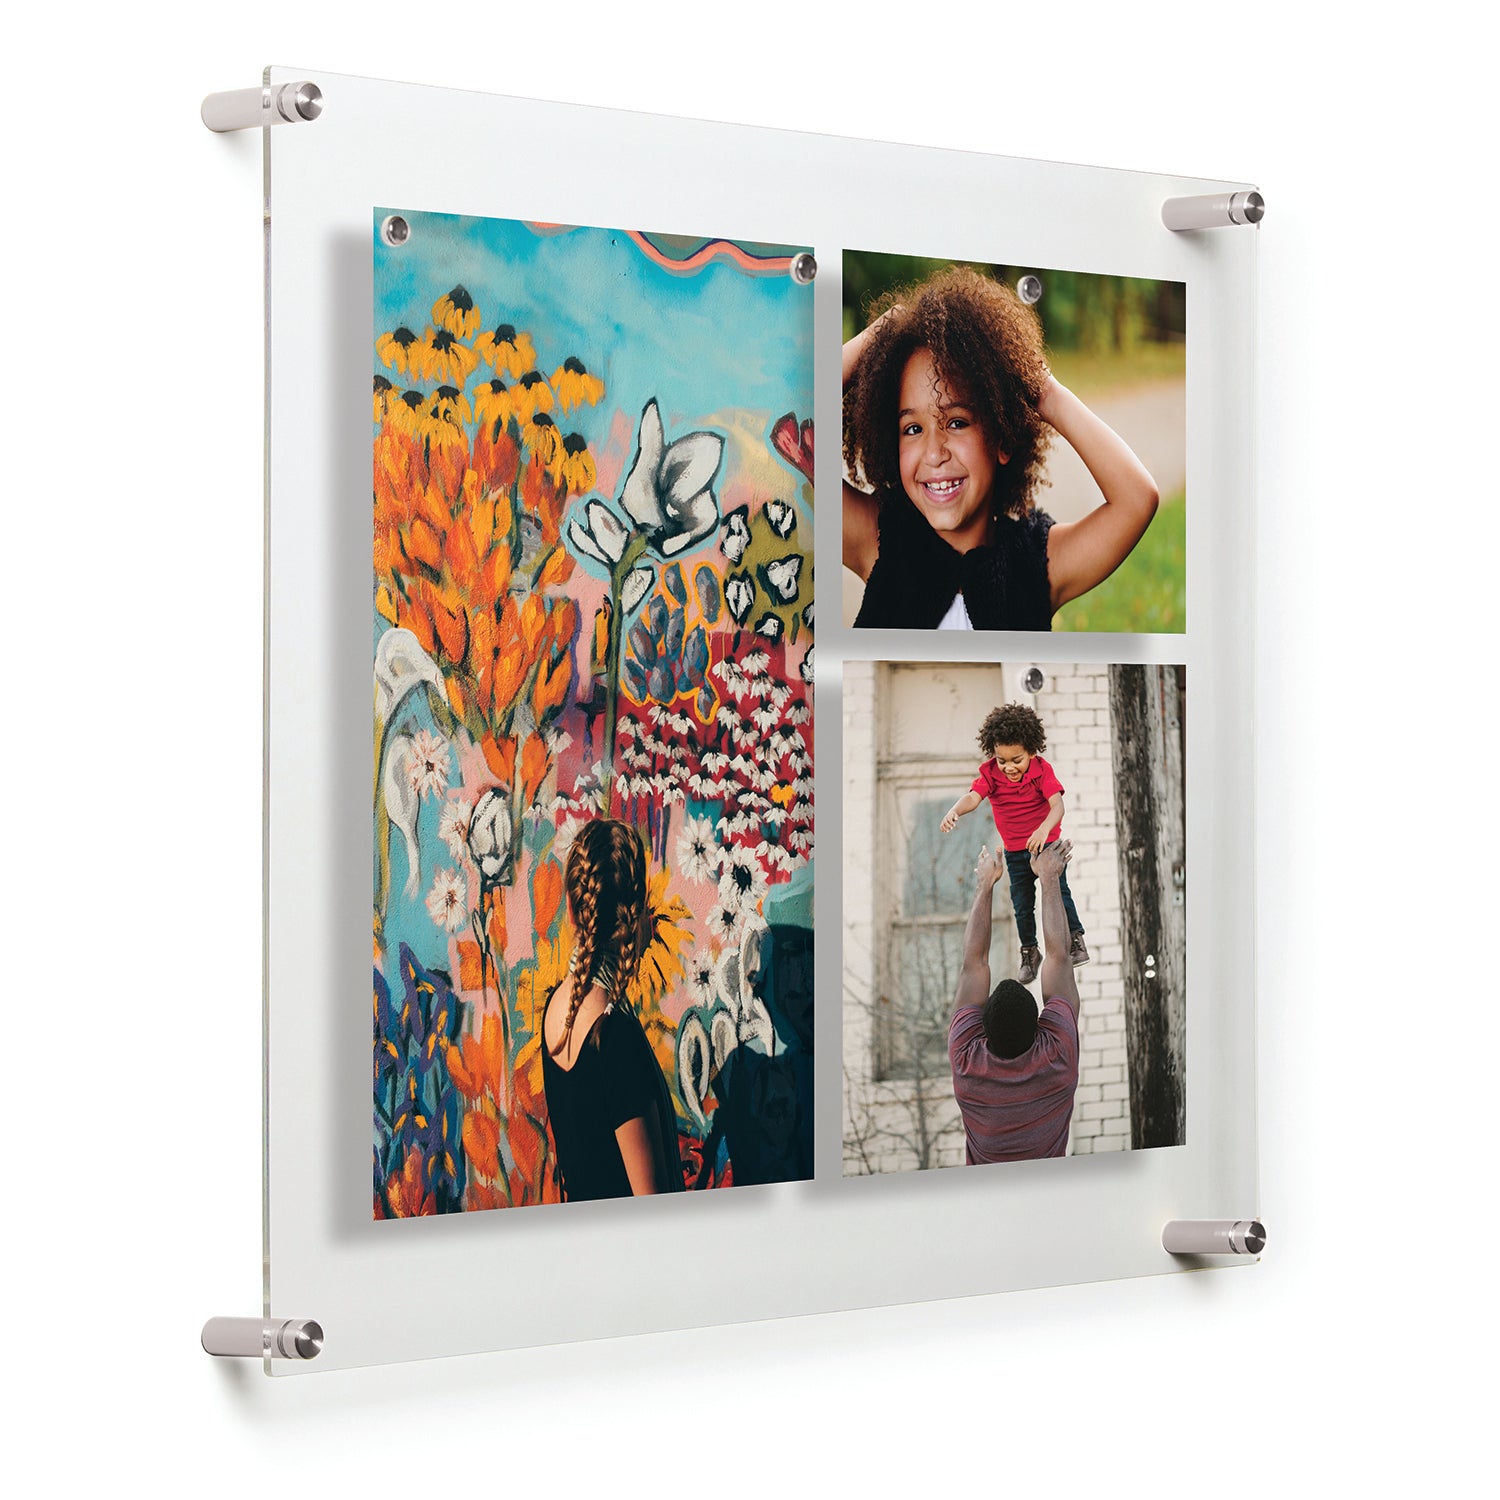 Clear Acrylic Picture Frame - 4x6 Photos for Modern Display – Wexel Art